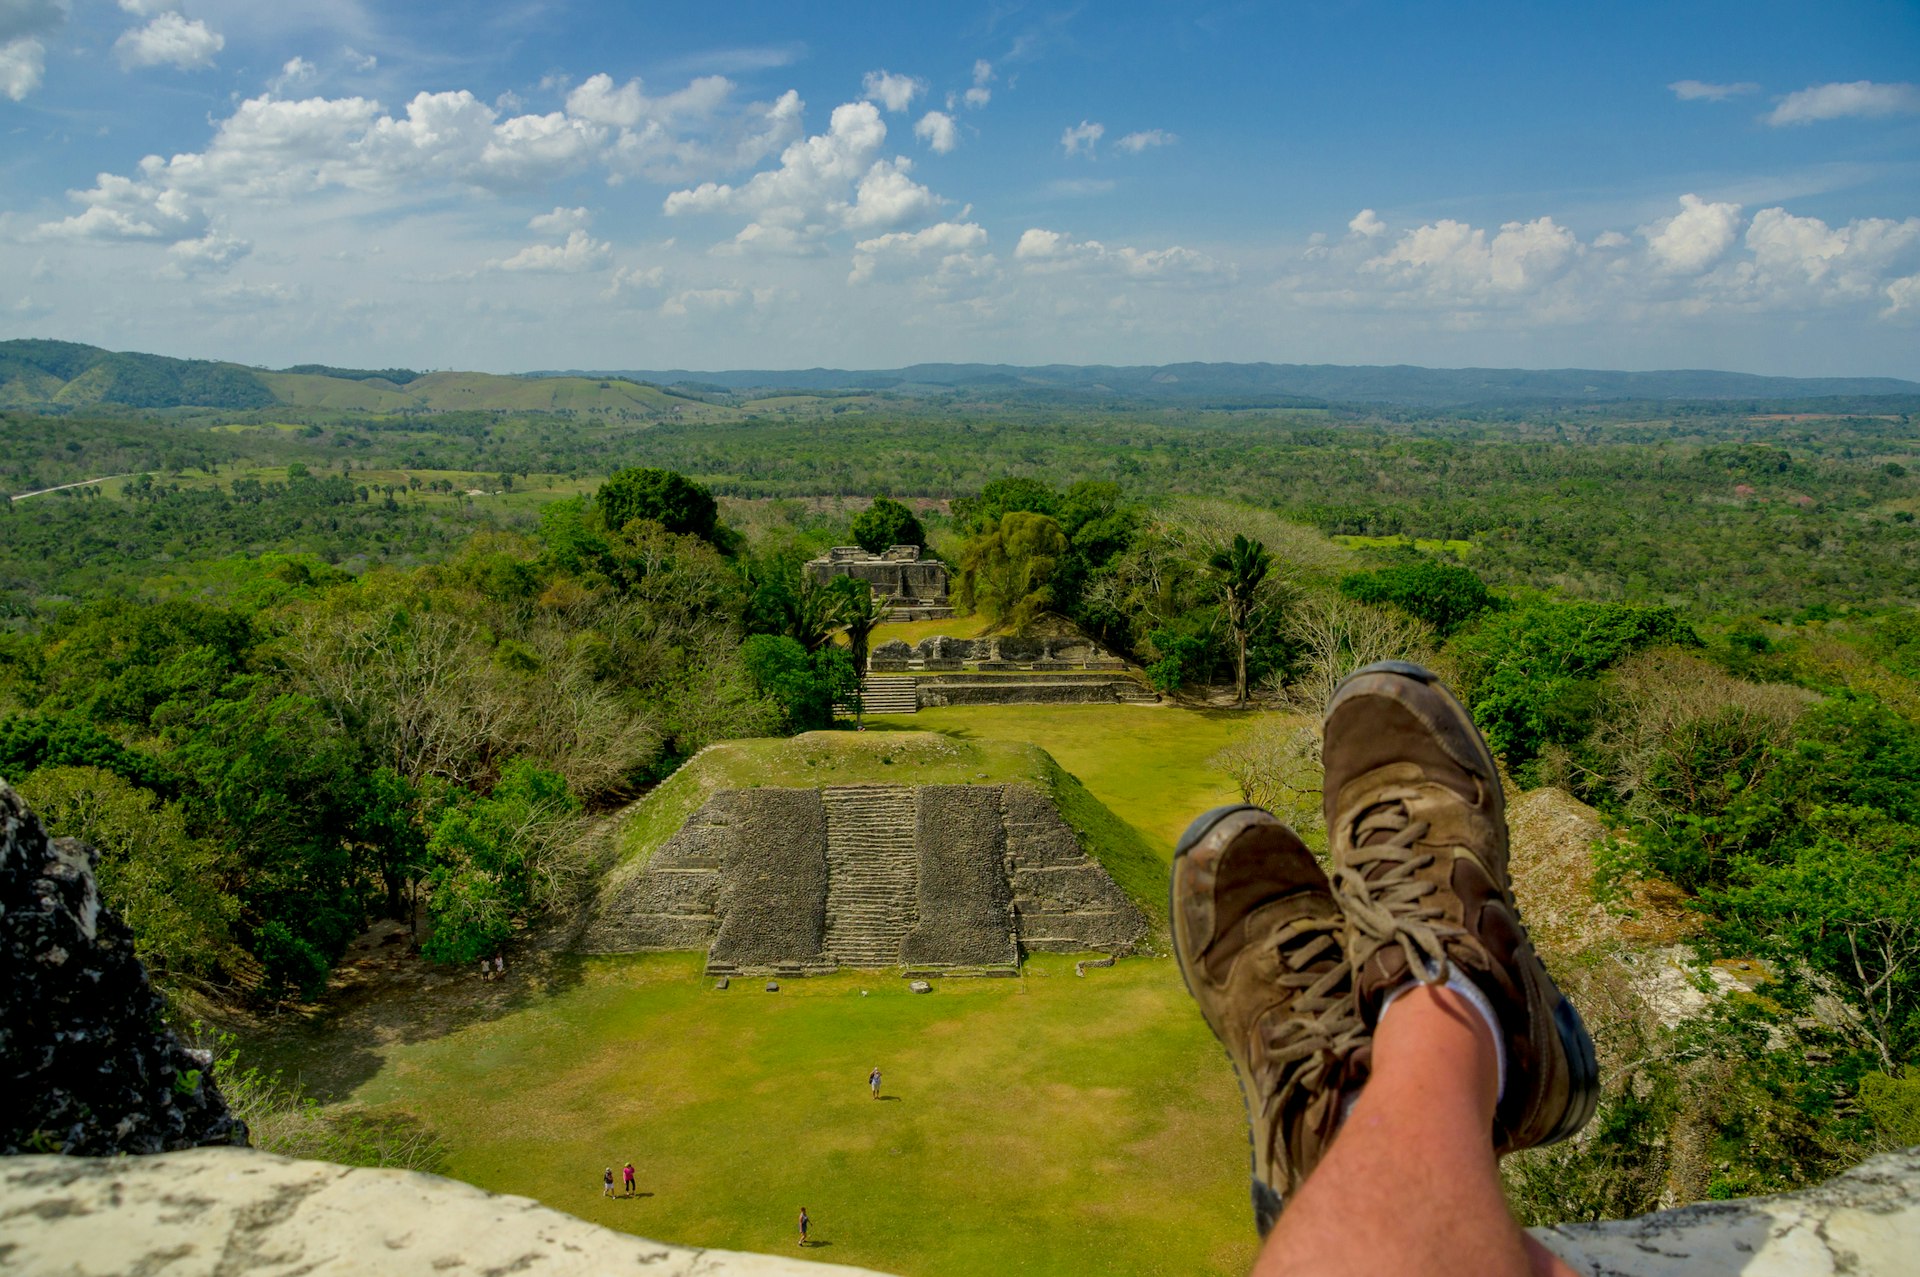 A pair of feet in hiking boots rest at a viewpoint above an ancient city in the jungle